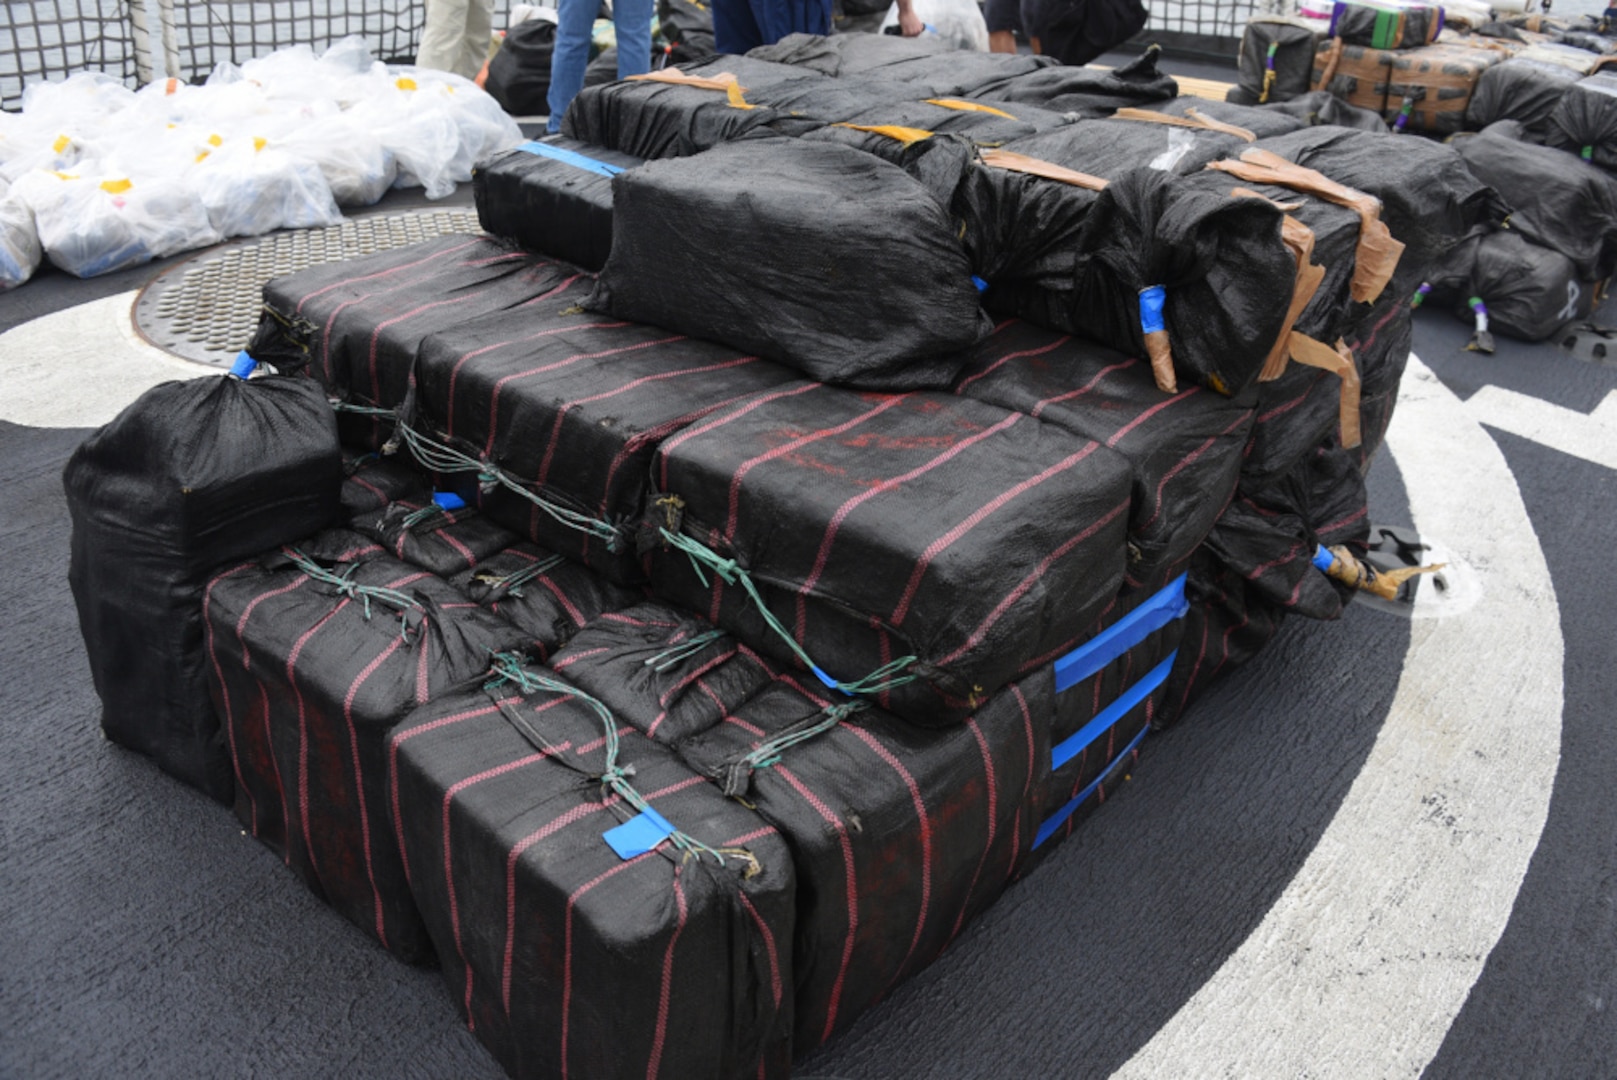 Bails of seized cocaine sit on the deck of the Coast Guard Cutter Active (WMEC 618) before being offloaded in San Diego, Wednesday. The drugs, worth an estimated $220 million, were seized in international waters of the Eastern Pacific Ocean during April and May. (Coast Guard photo by Petty Officer 3rd Class Alex Gray)